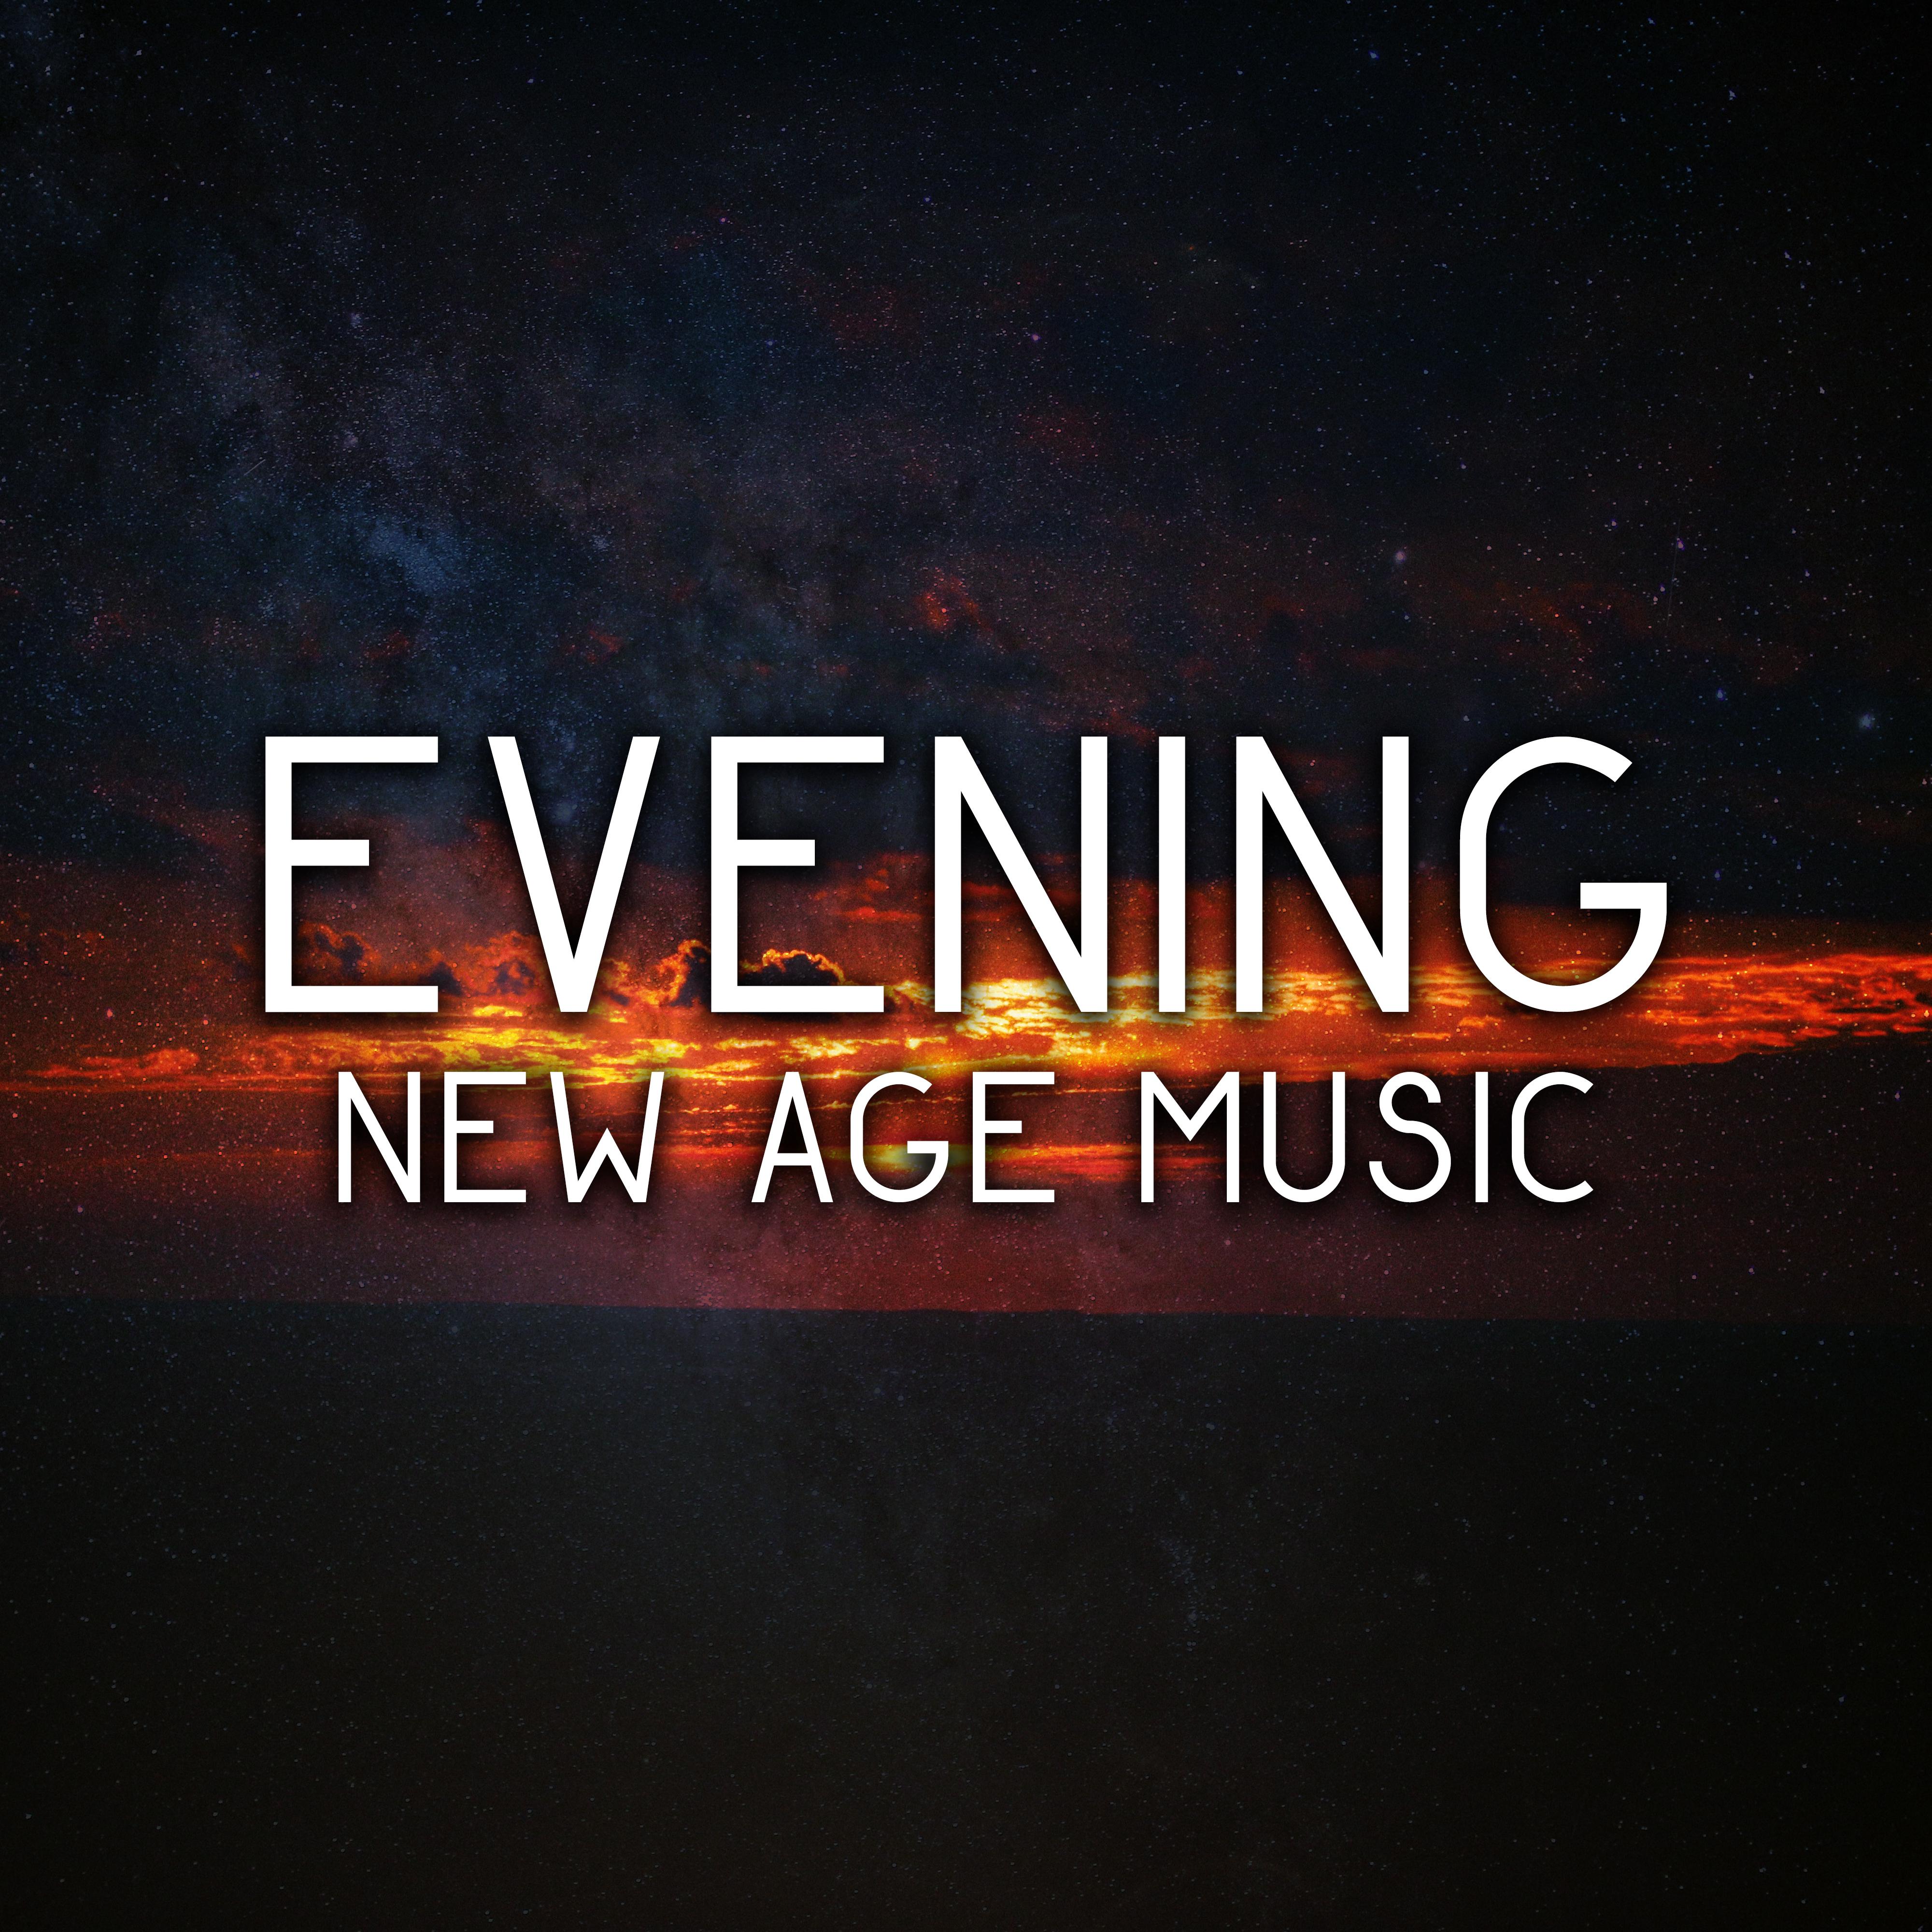 Evening New Age Music  Soft Melodies to Relax, Rest a Bit, Stress Relief, Peaceful Sounds